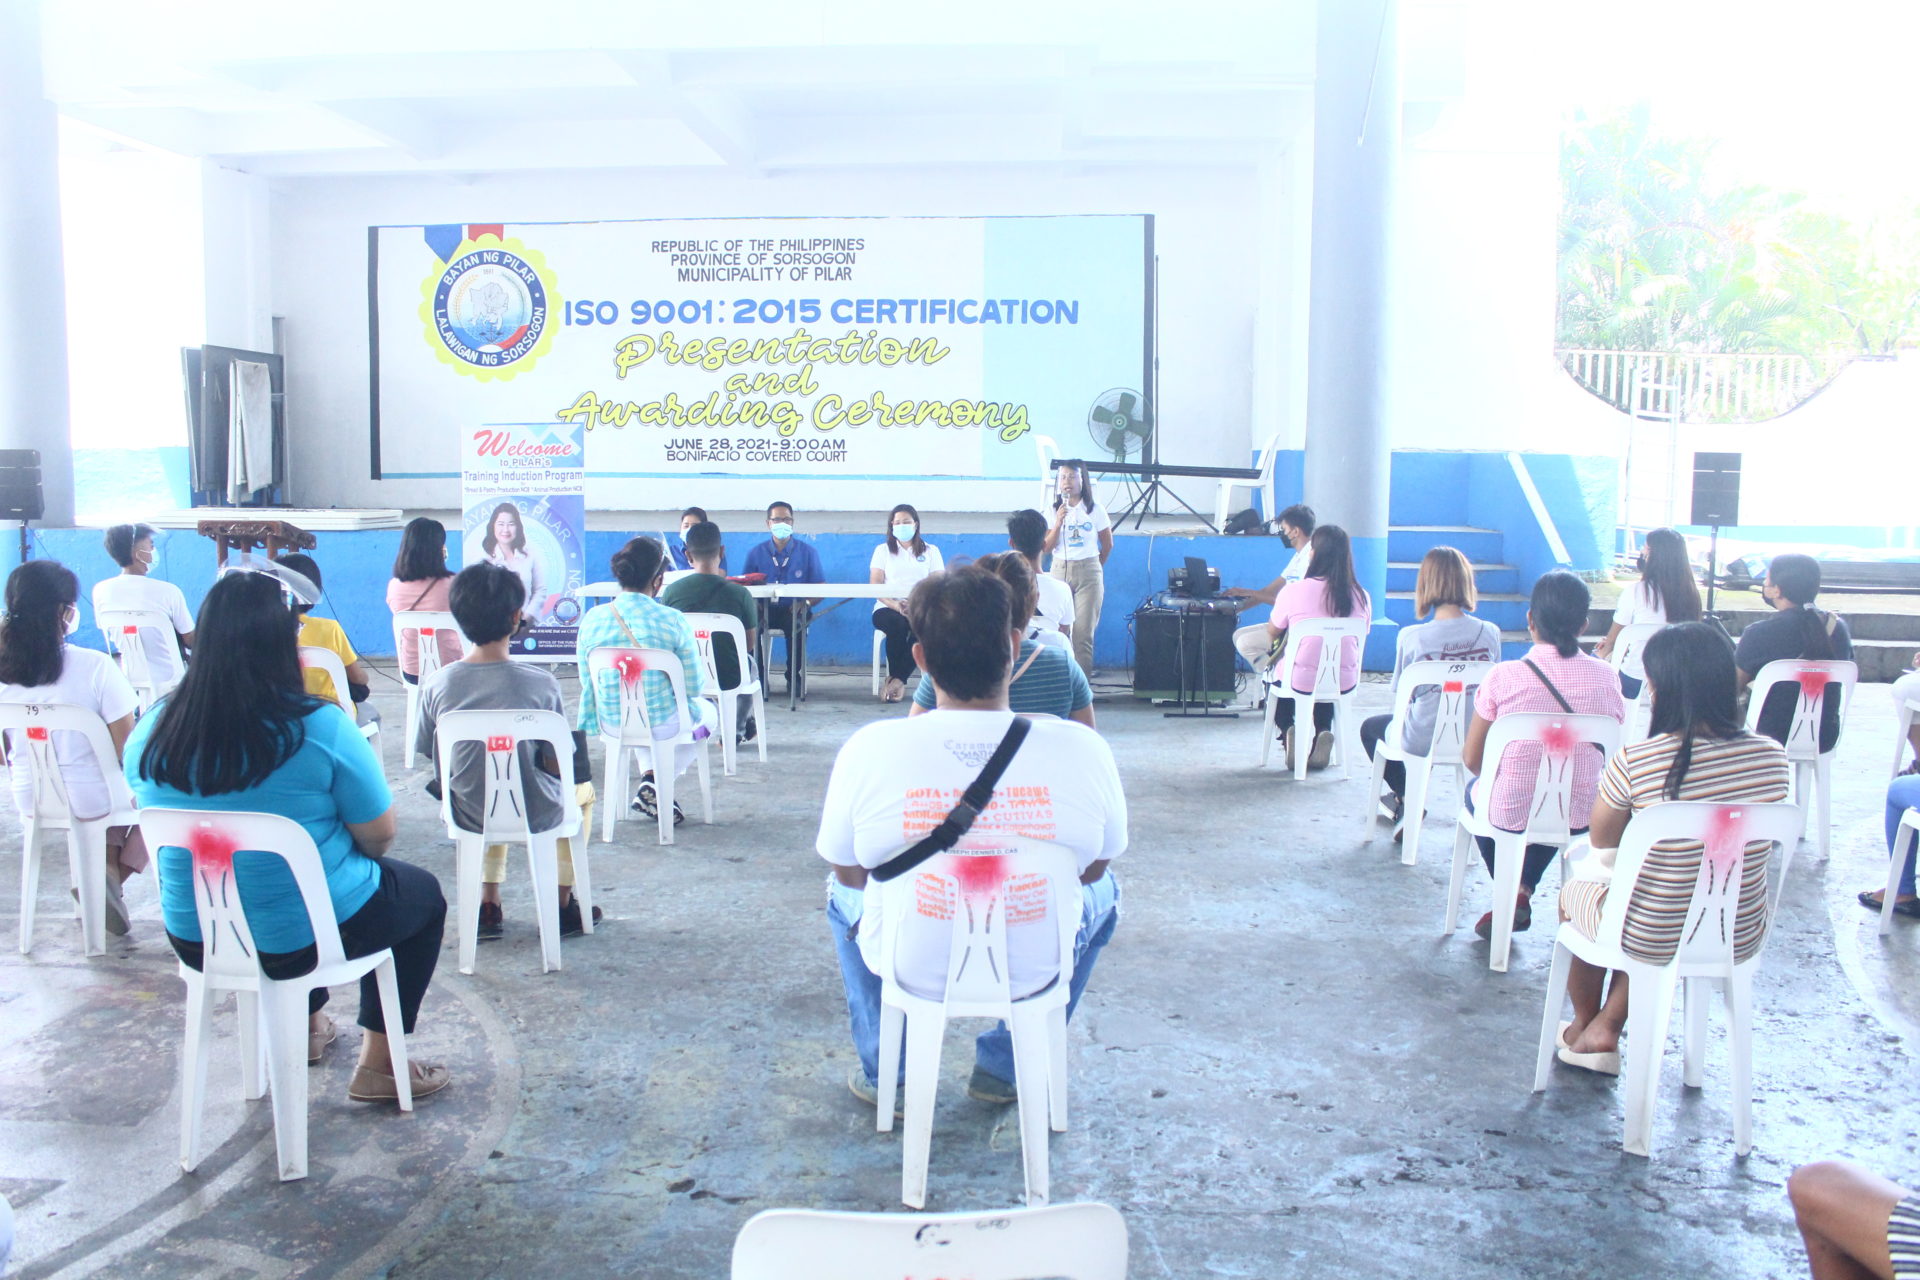 TESDA Training in PILAR this year: A jumpstart held today